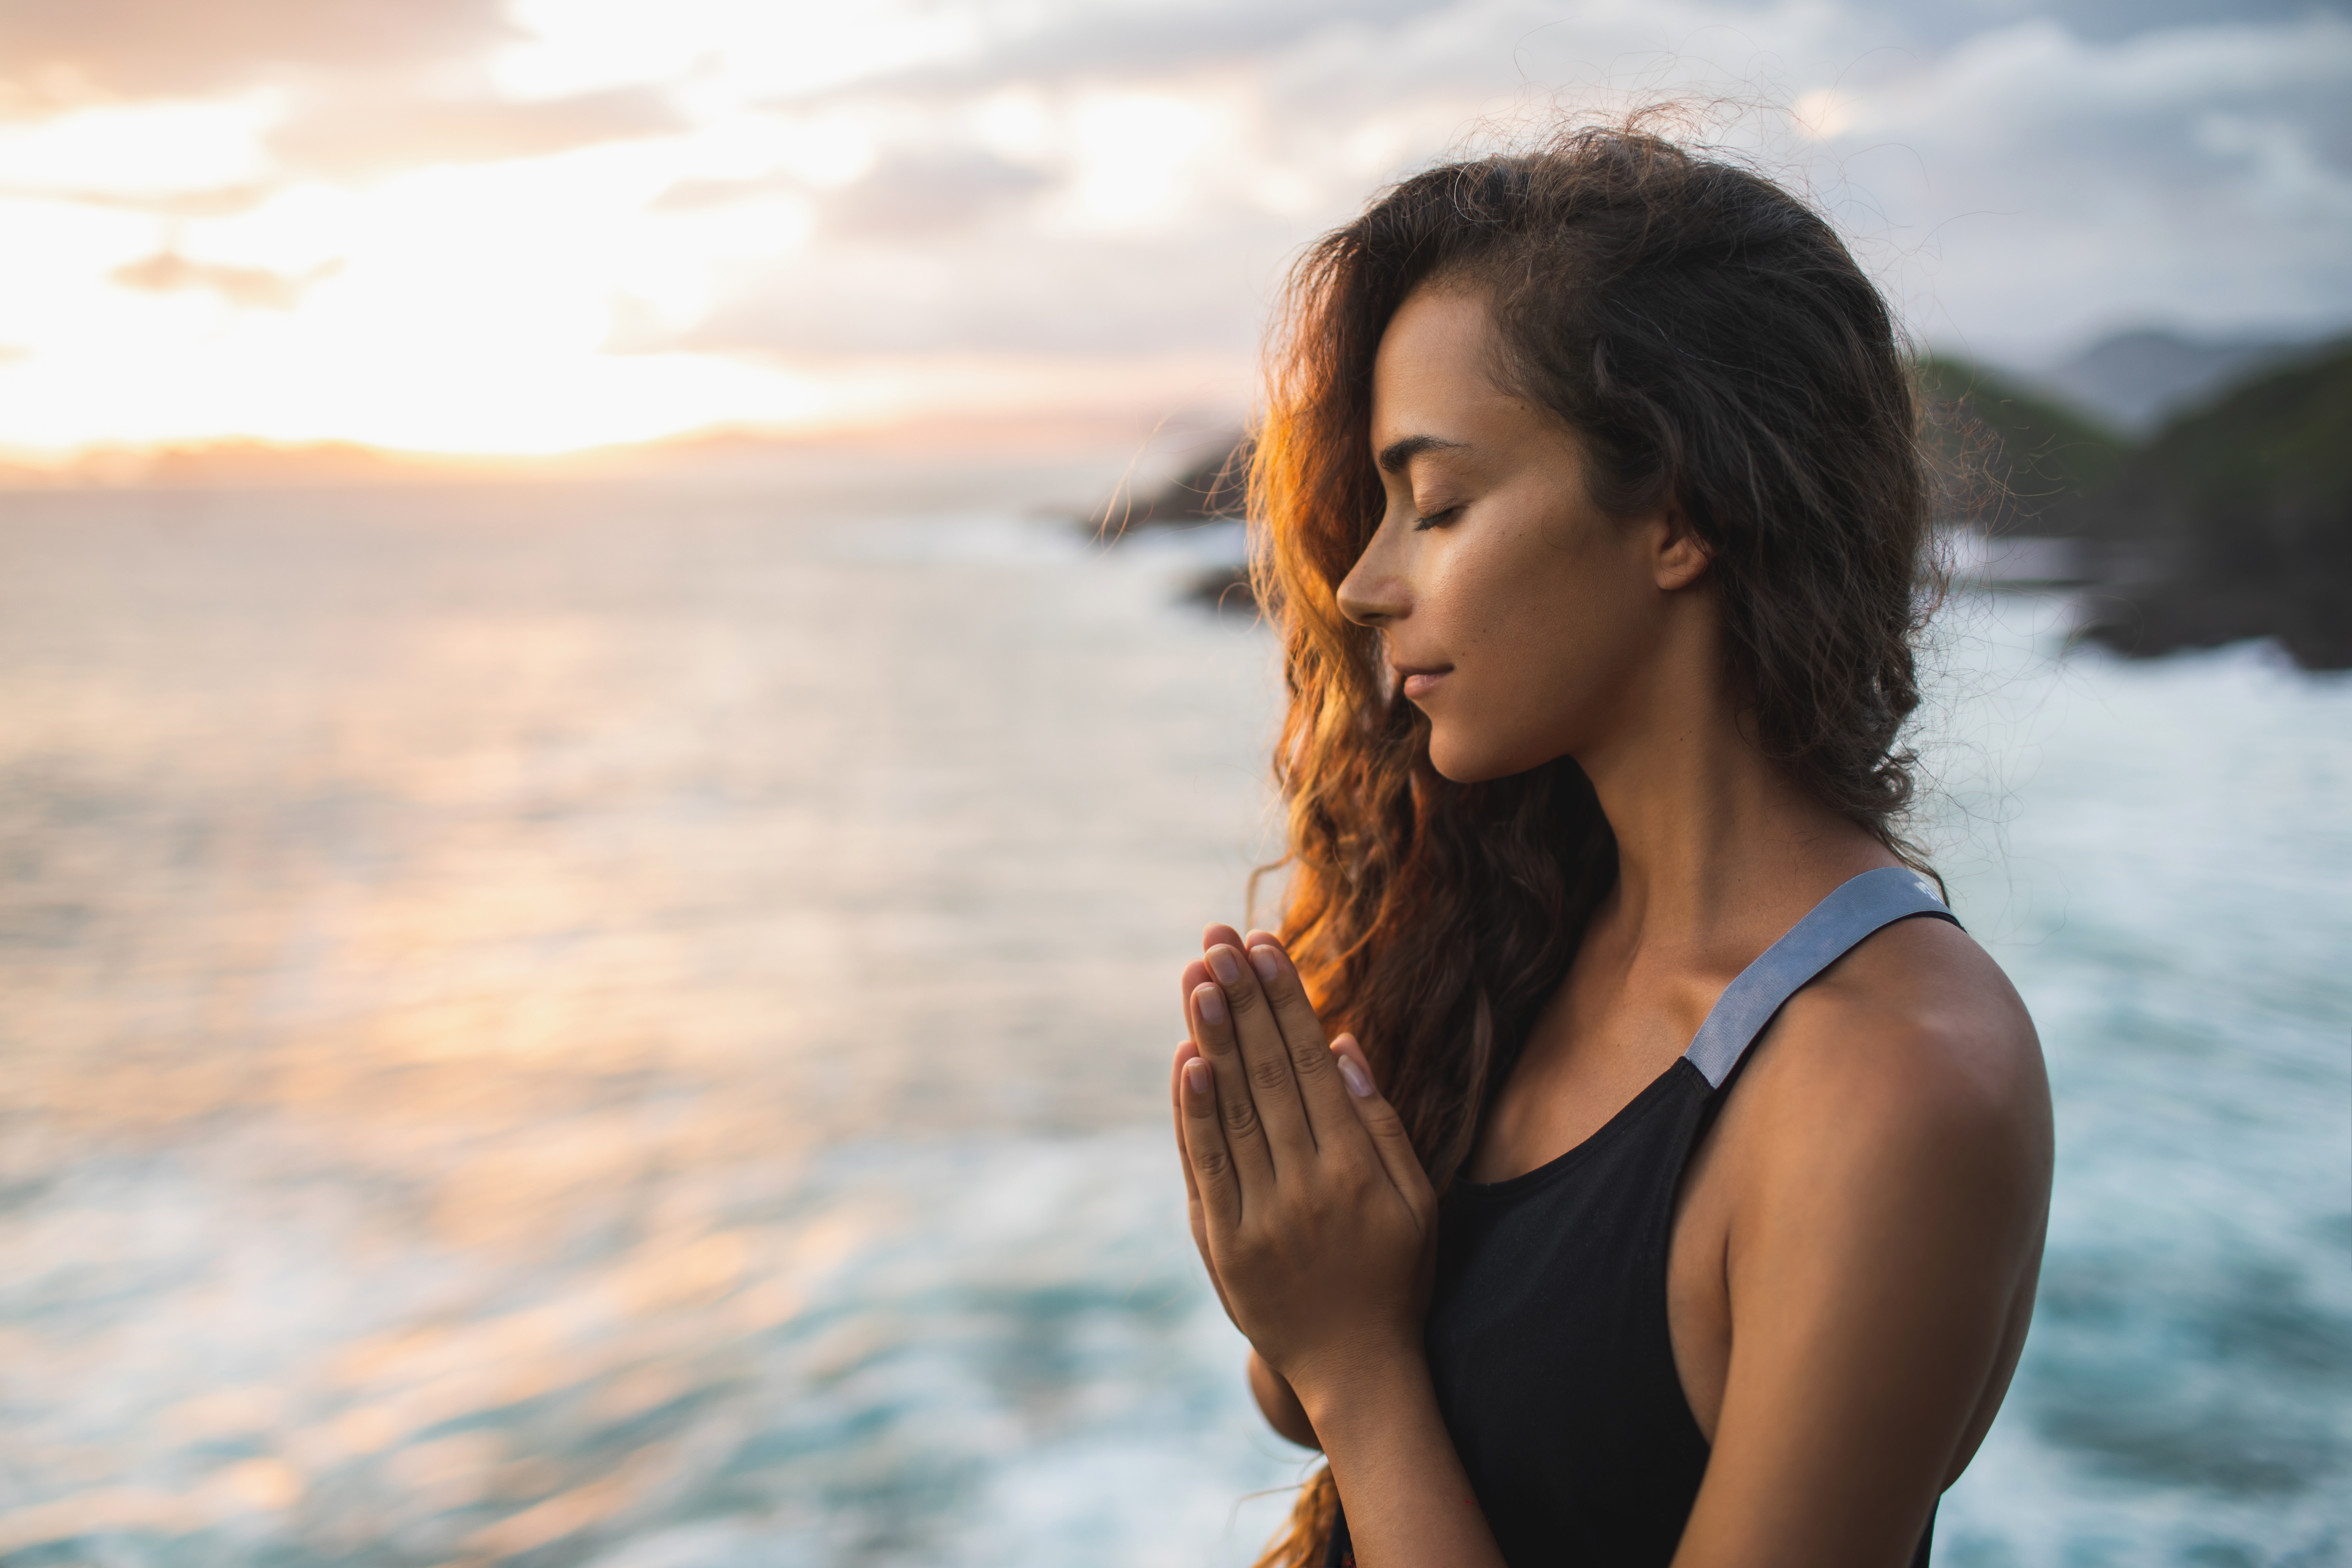 A woman standing near the ocean with her hands in a prayer position with her eyes closed | Source: Shutterstock